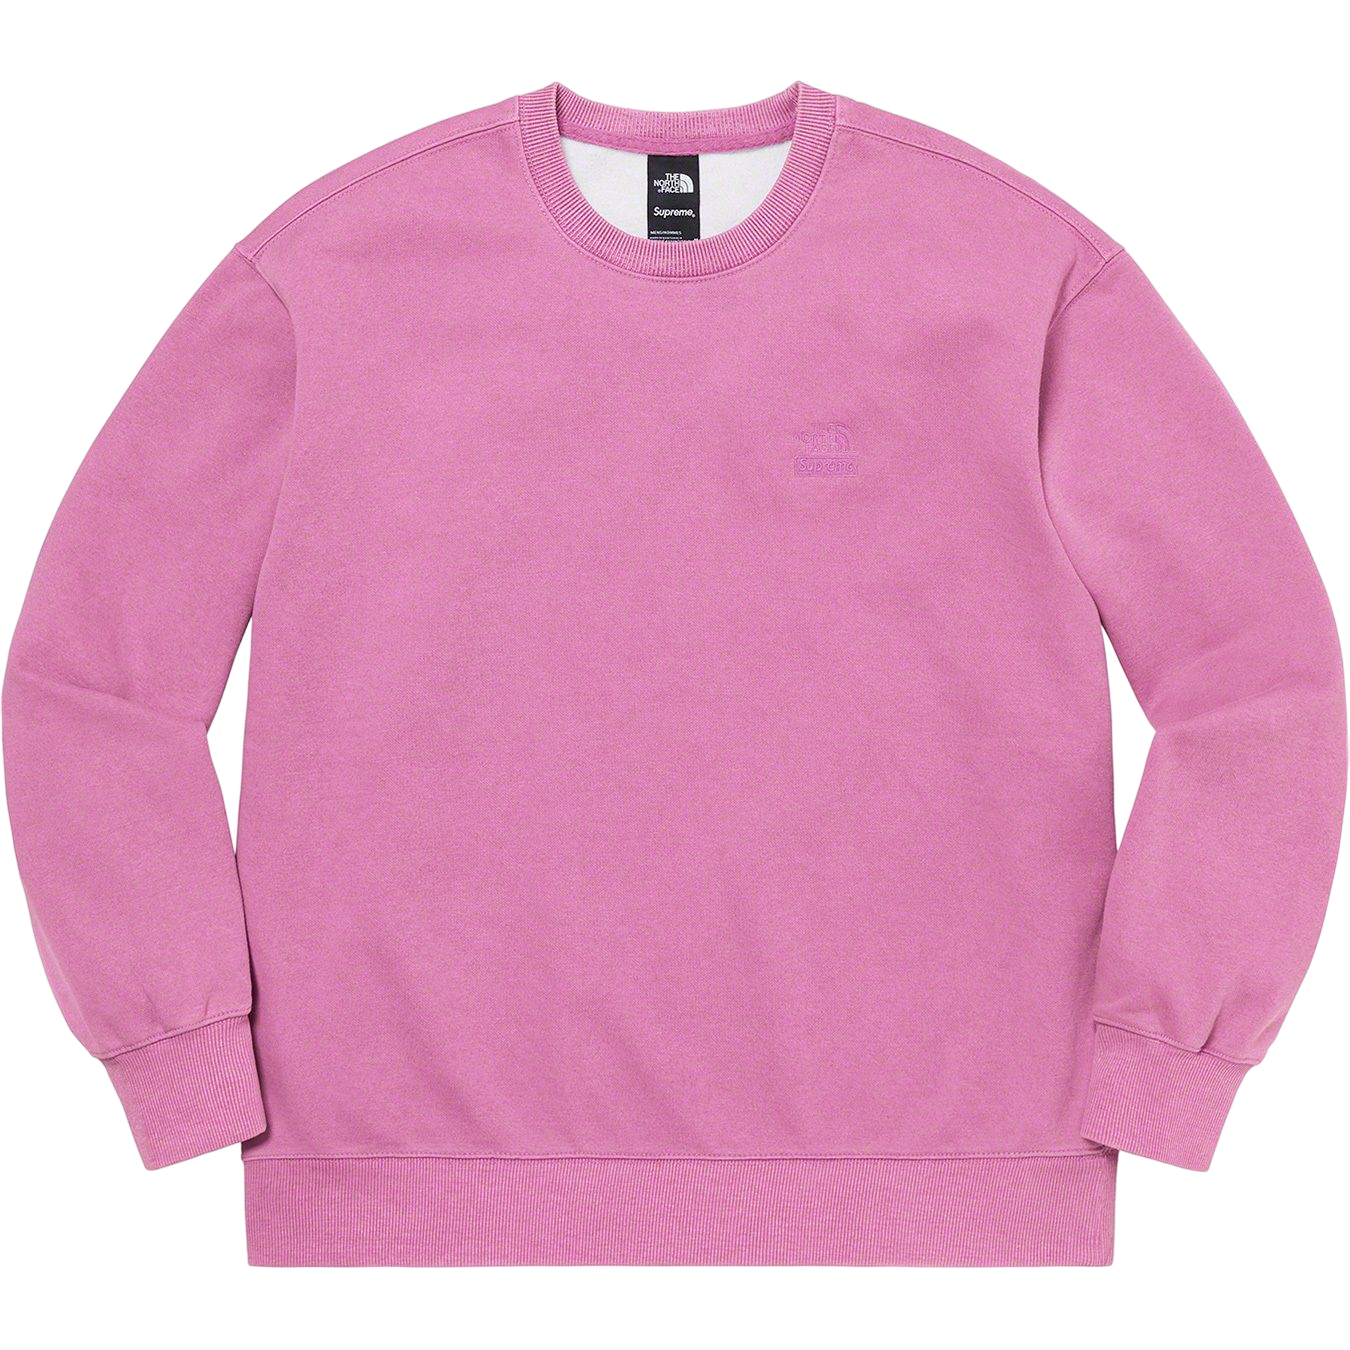 Supreme x The North Face Pigment Printed Crewneck - Pink